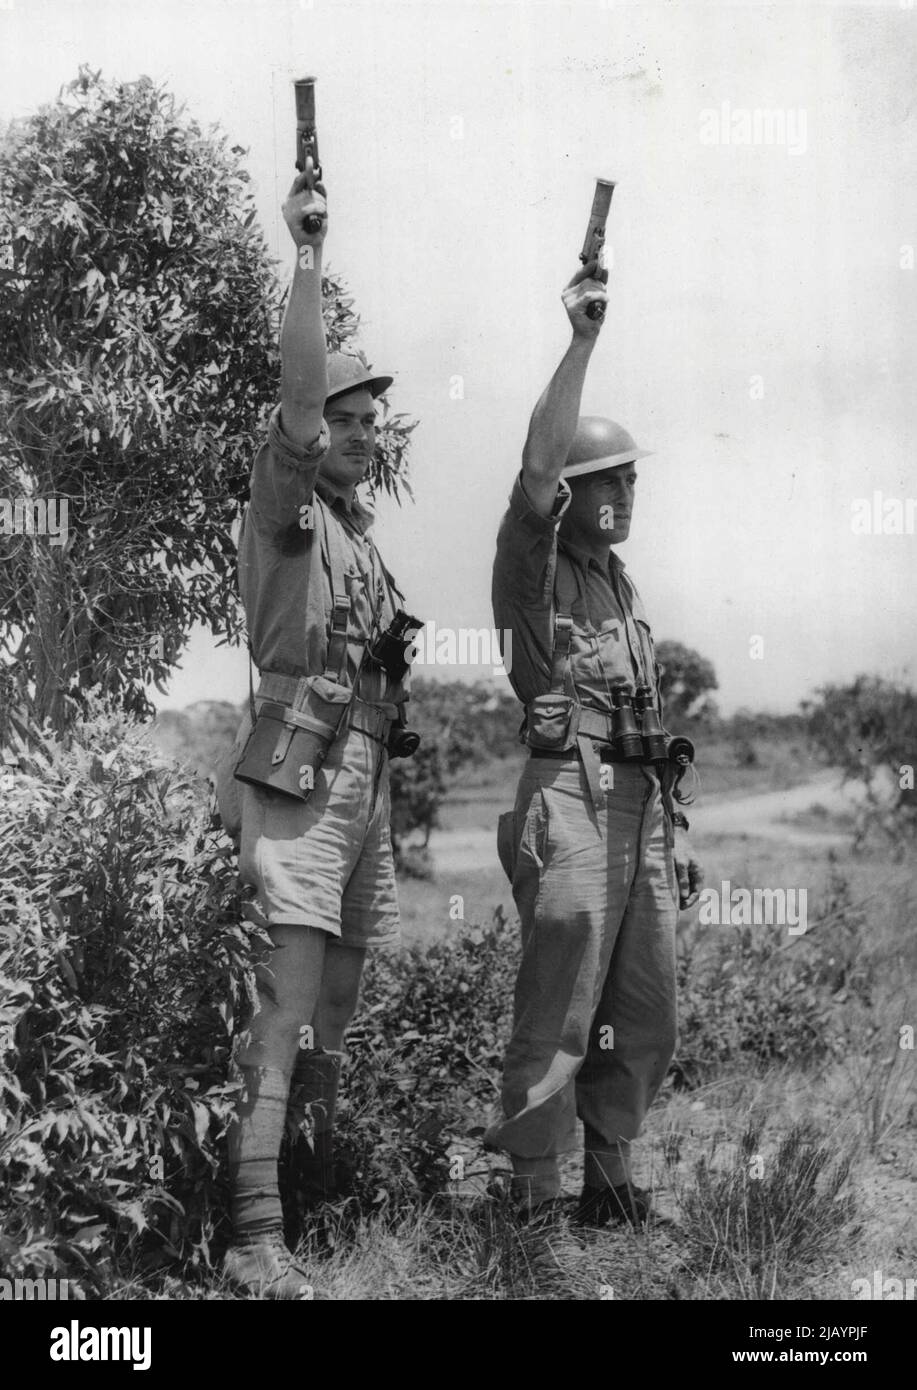 Attack Signal -- Troops tensed for an assault on 'enemy' positions on Army manoeuvres receiving a signal to open operations. July 11, 1950. Stock Photo